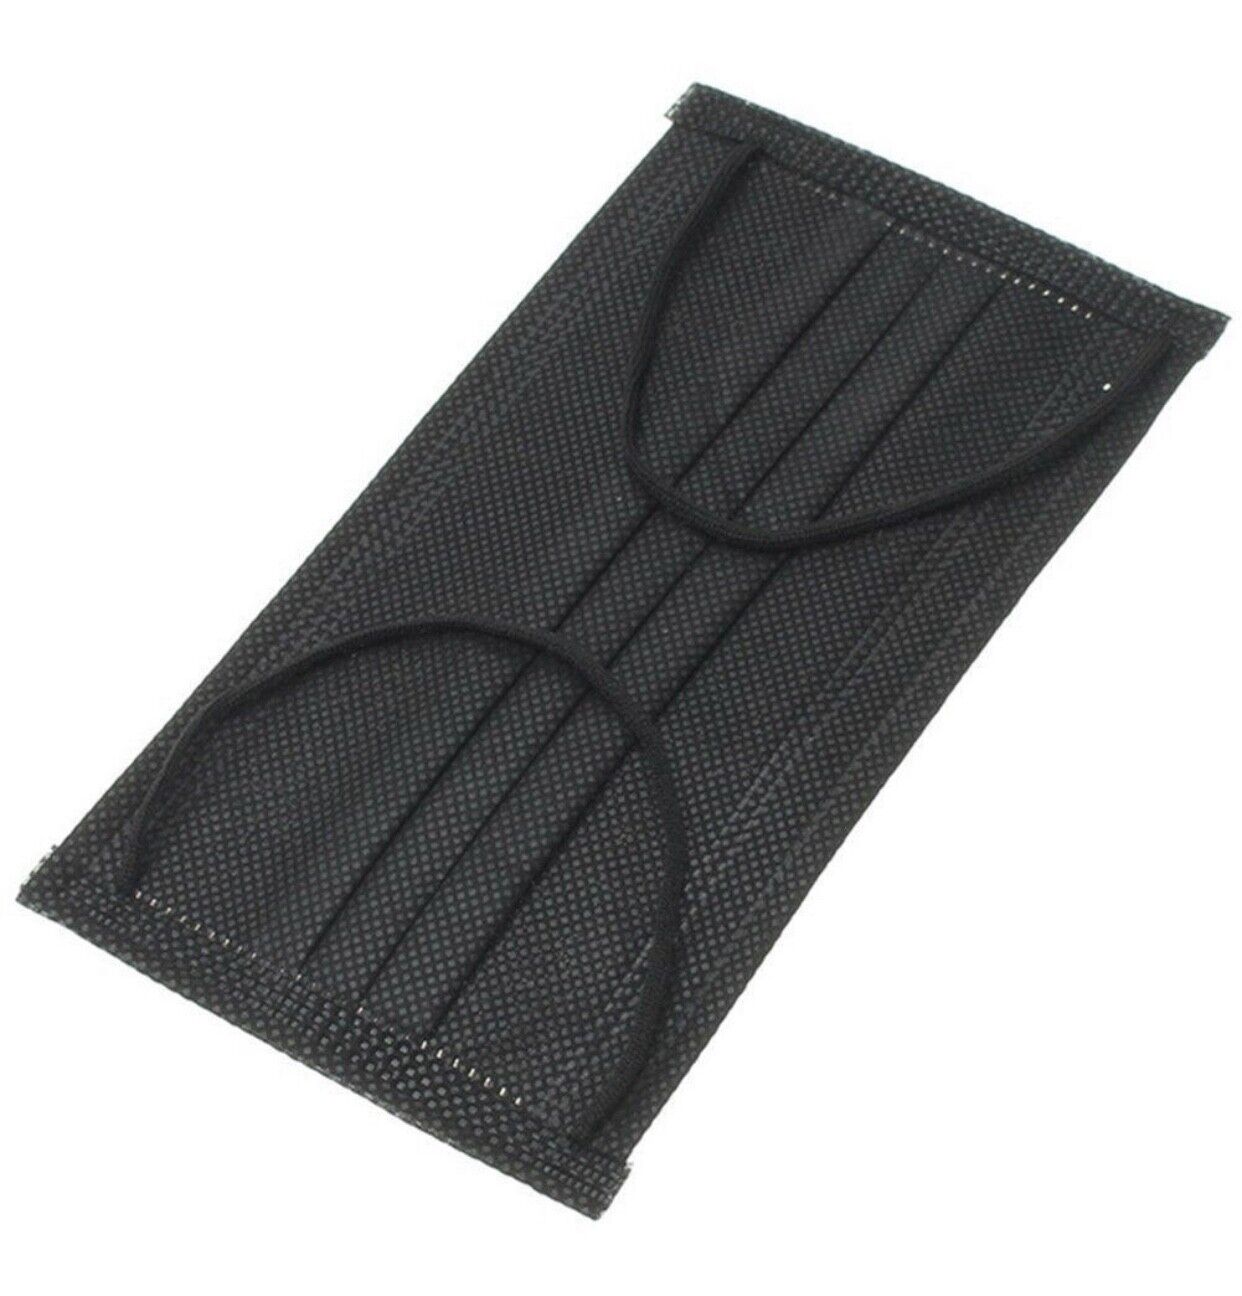 50 PCS Black 3-Ply Disposable Face Mask Non Medical Surgical Earloop Mouth Cover Unbranded/Generic Not Applicable - фотография #3